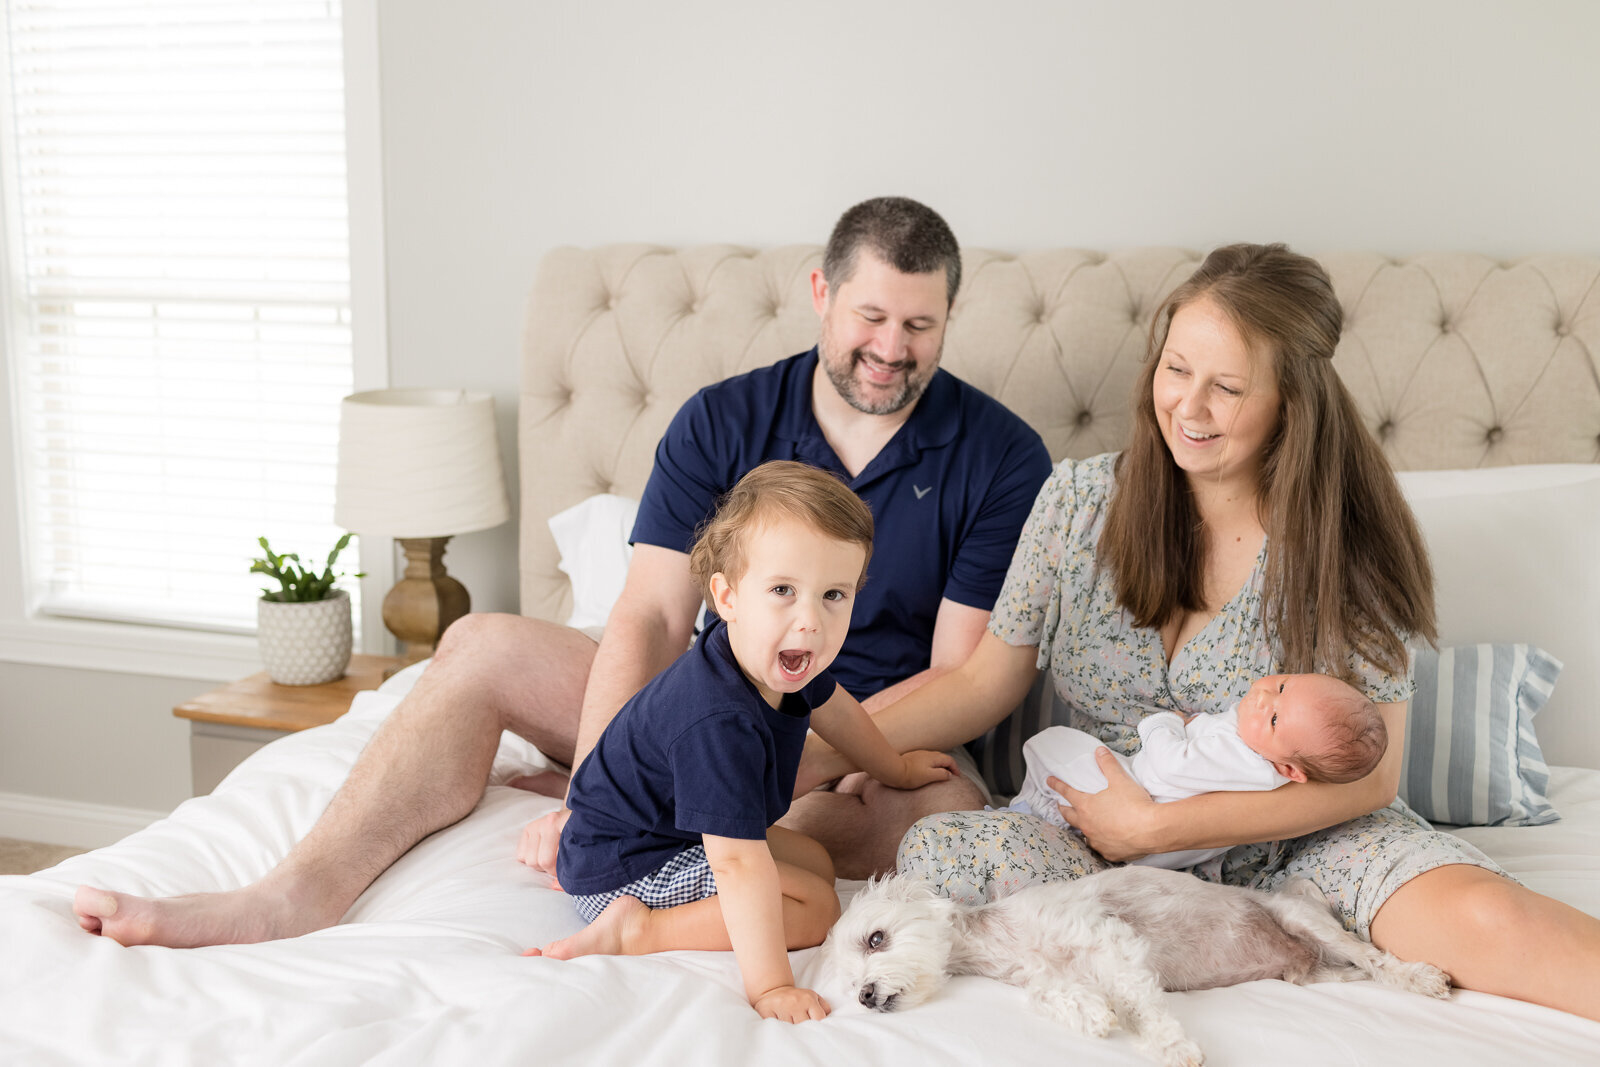 Baby_boy_in-home_newborn_lifestyle_photography_session_Lexington_KY_photographer_toddler_sibling_plus_dog-3